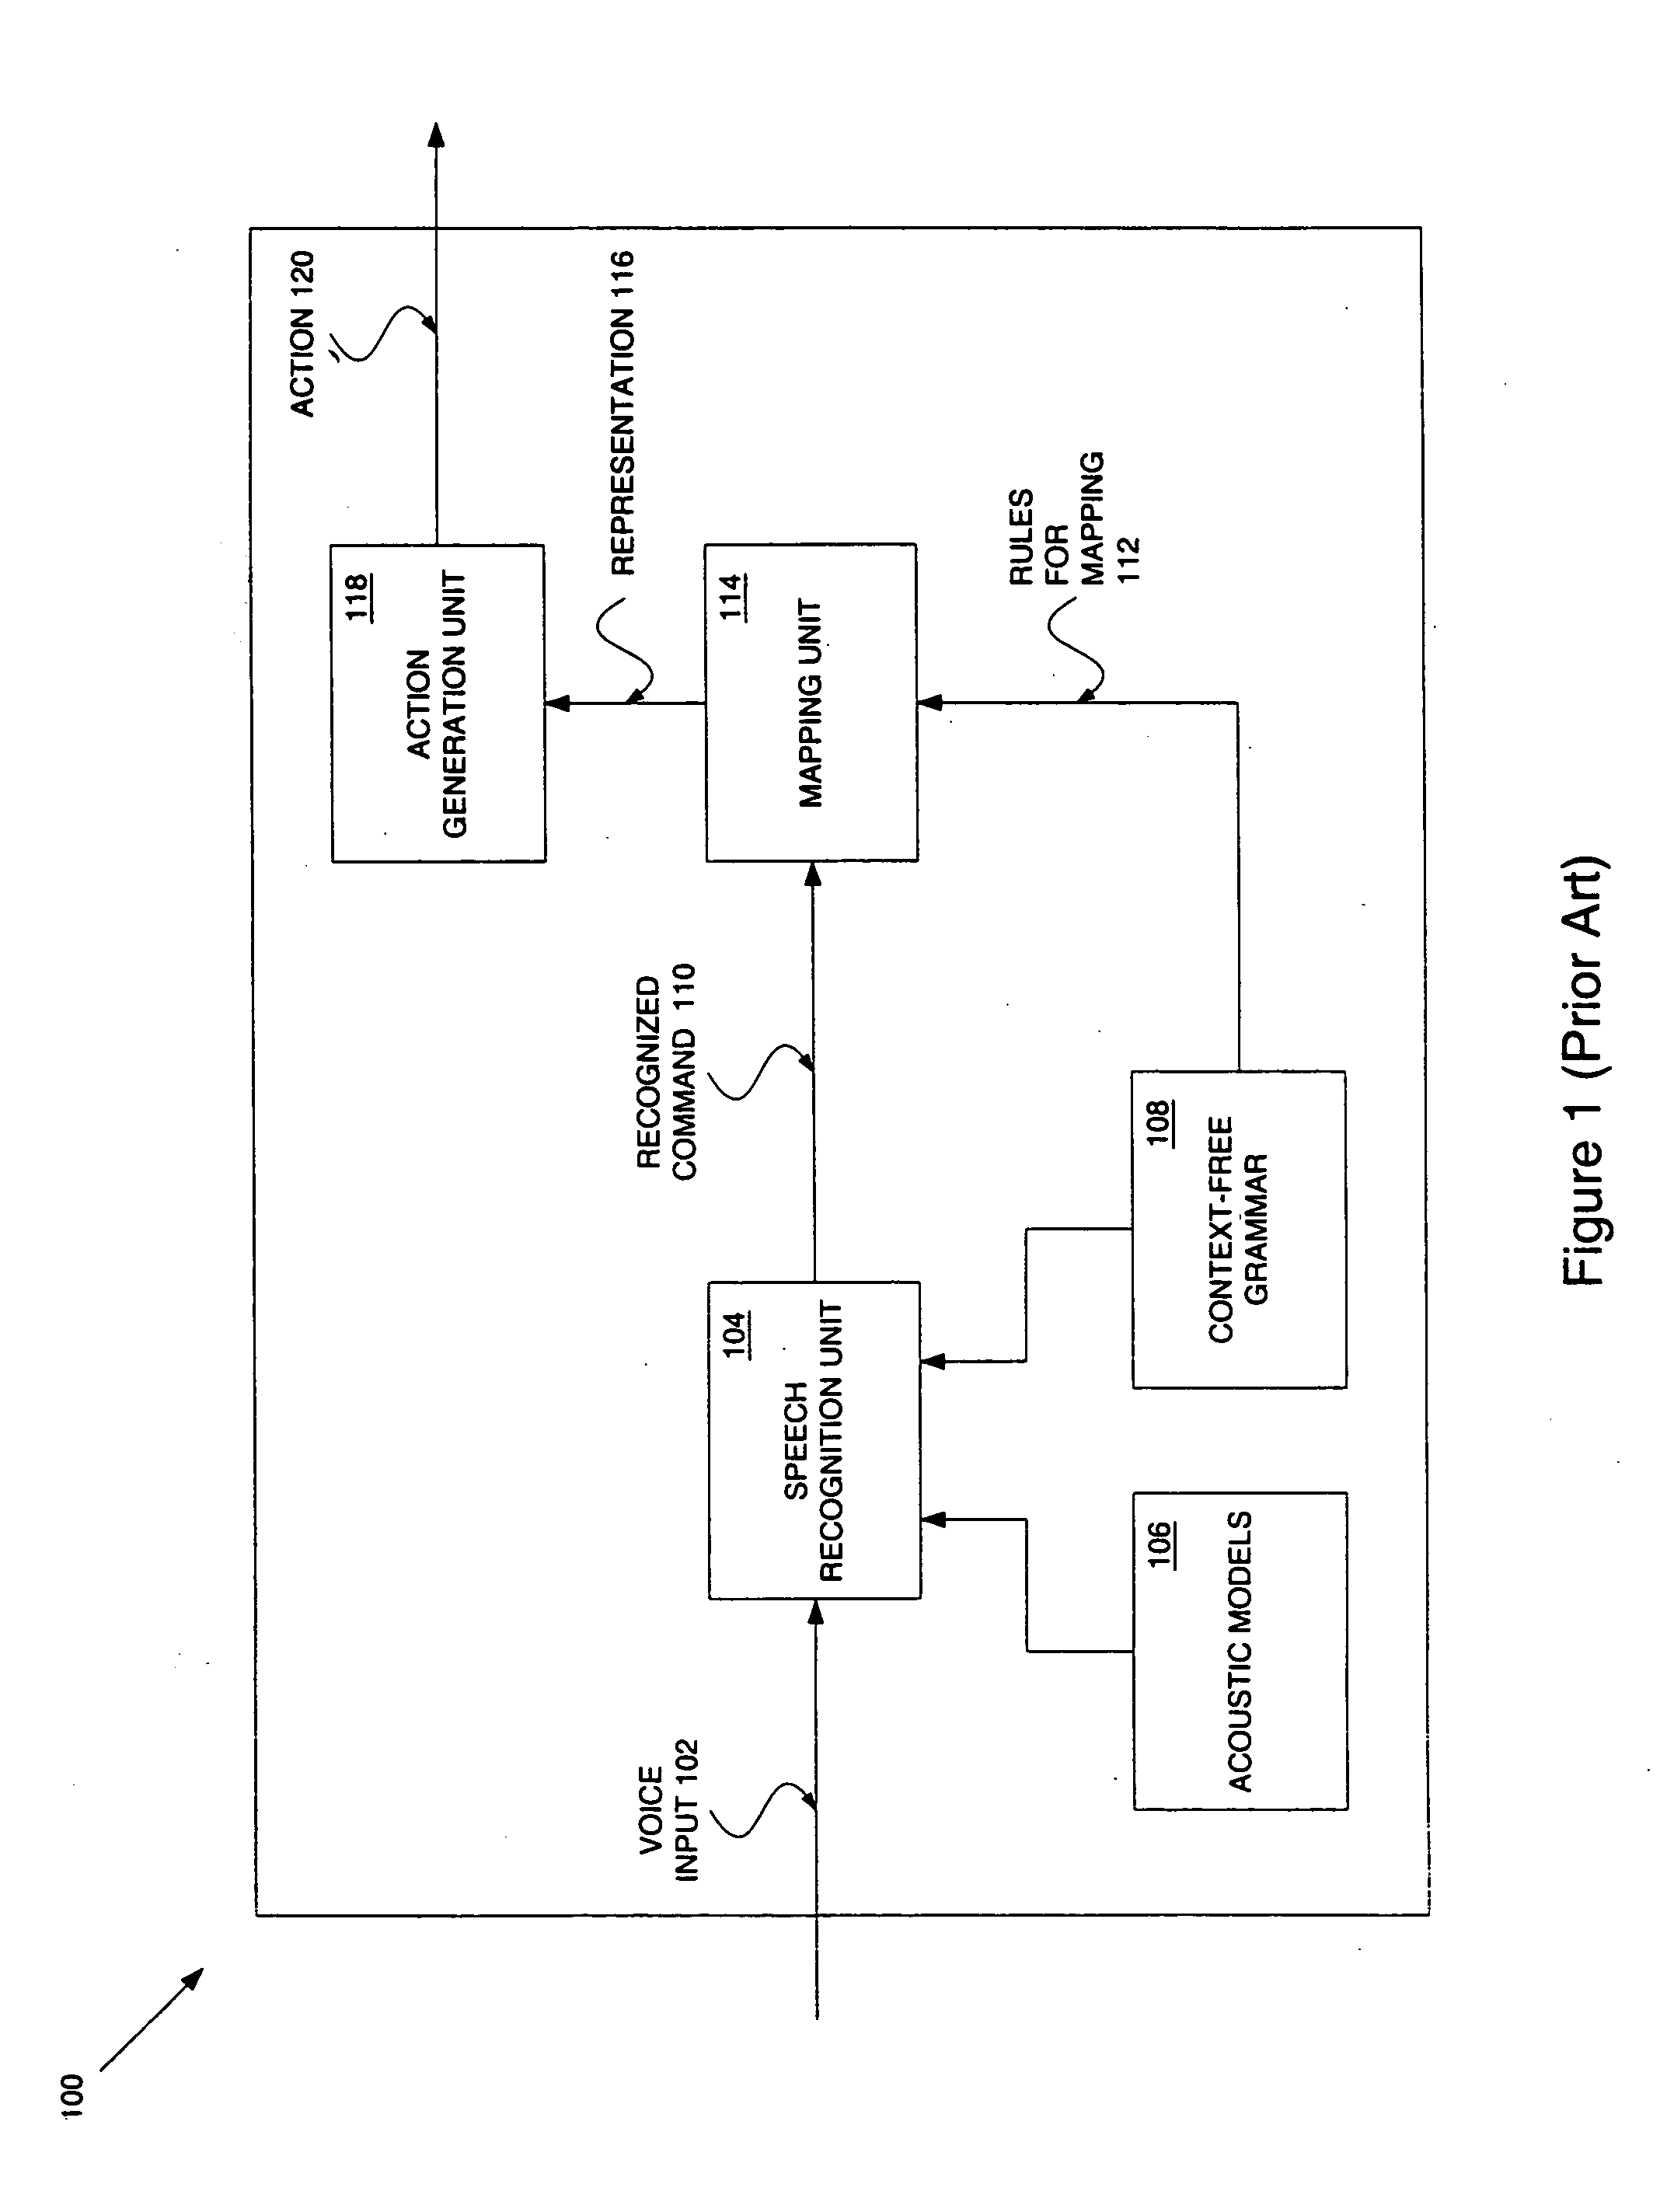 Method and apparatus to use semantic inference with speech recognition systems